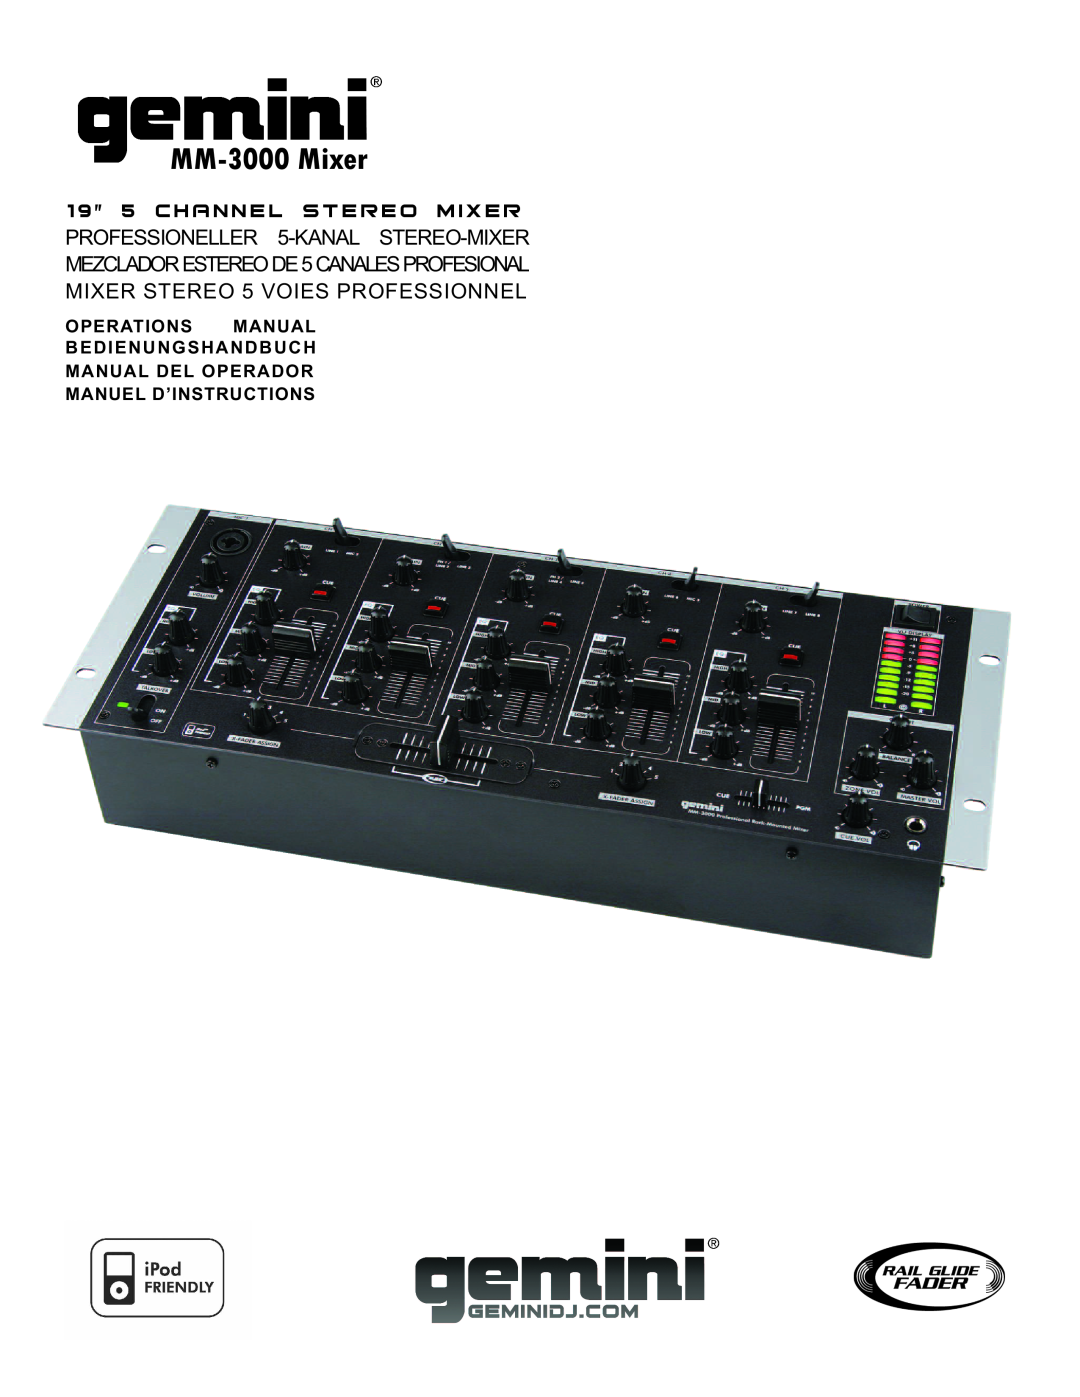 Gemini manual MM-3000 Mixer, PROFESSIONELLER 5-KANAL STEREO-MIXER, MIXER STERE O 5 VOIE S PROFES SIONNEL, Opera Tions 